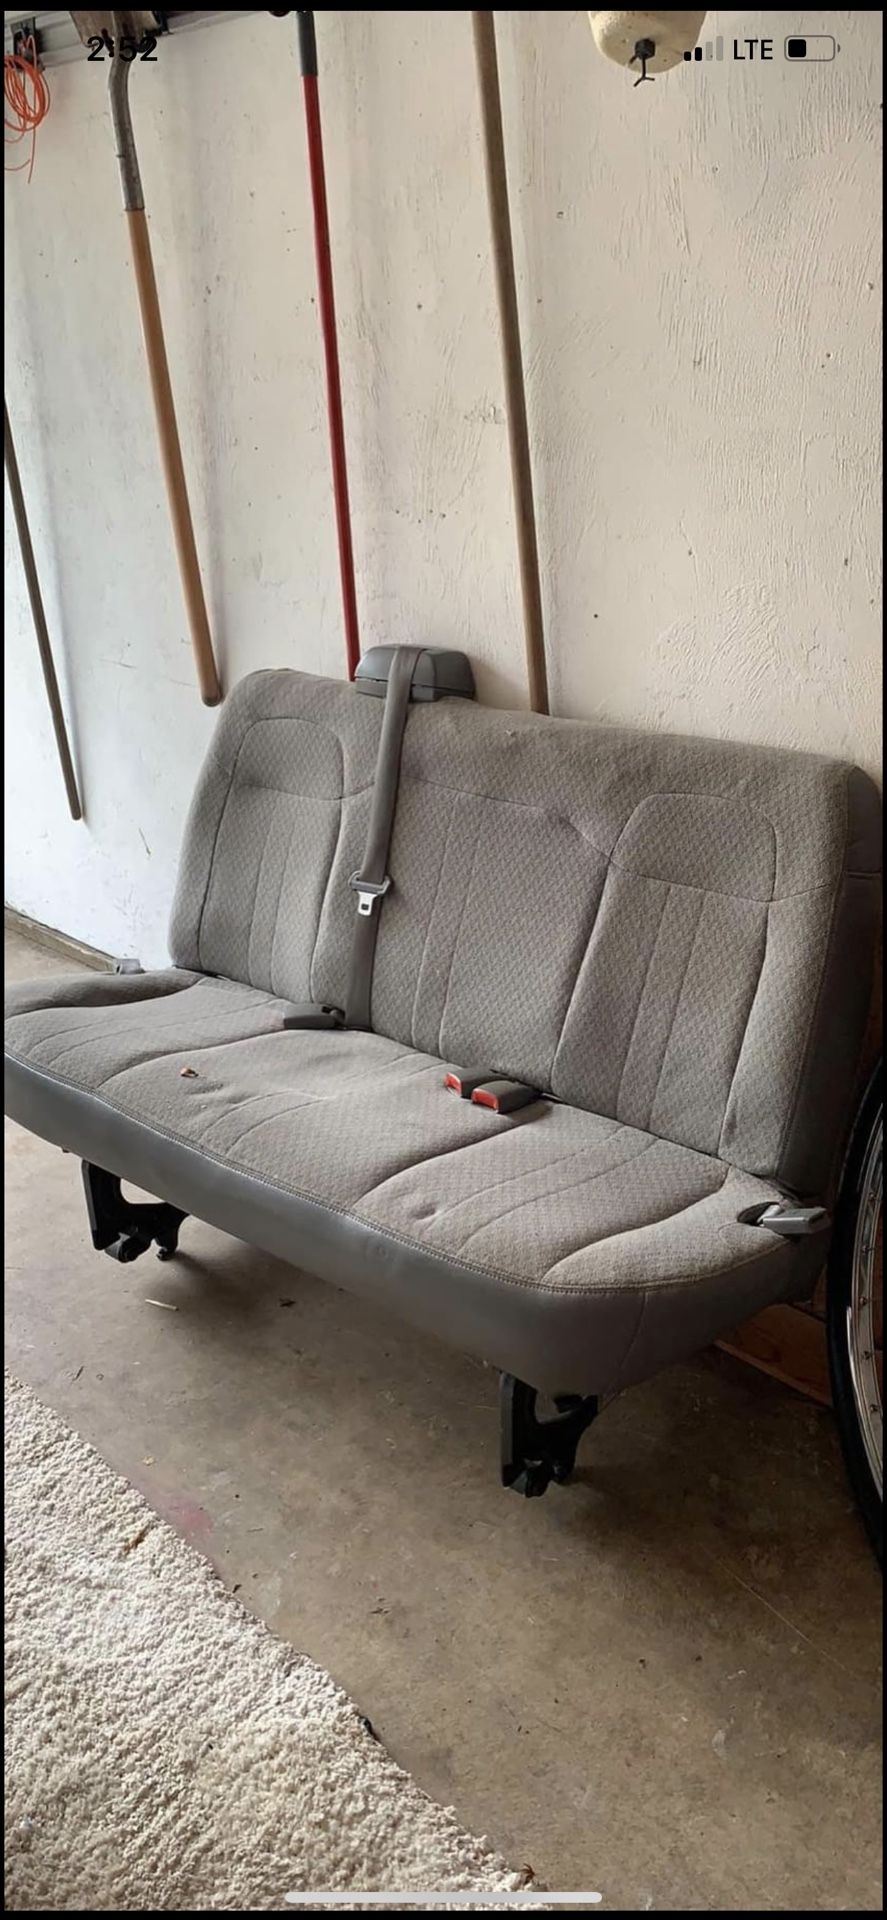 Chevy express seats